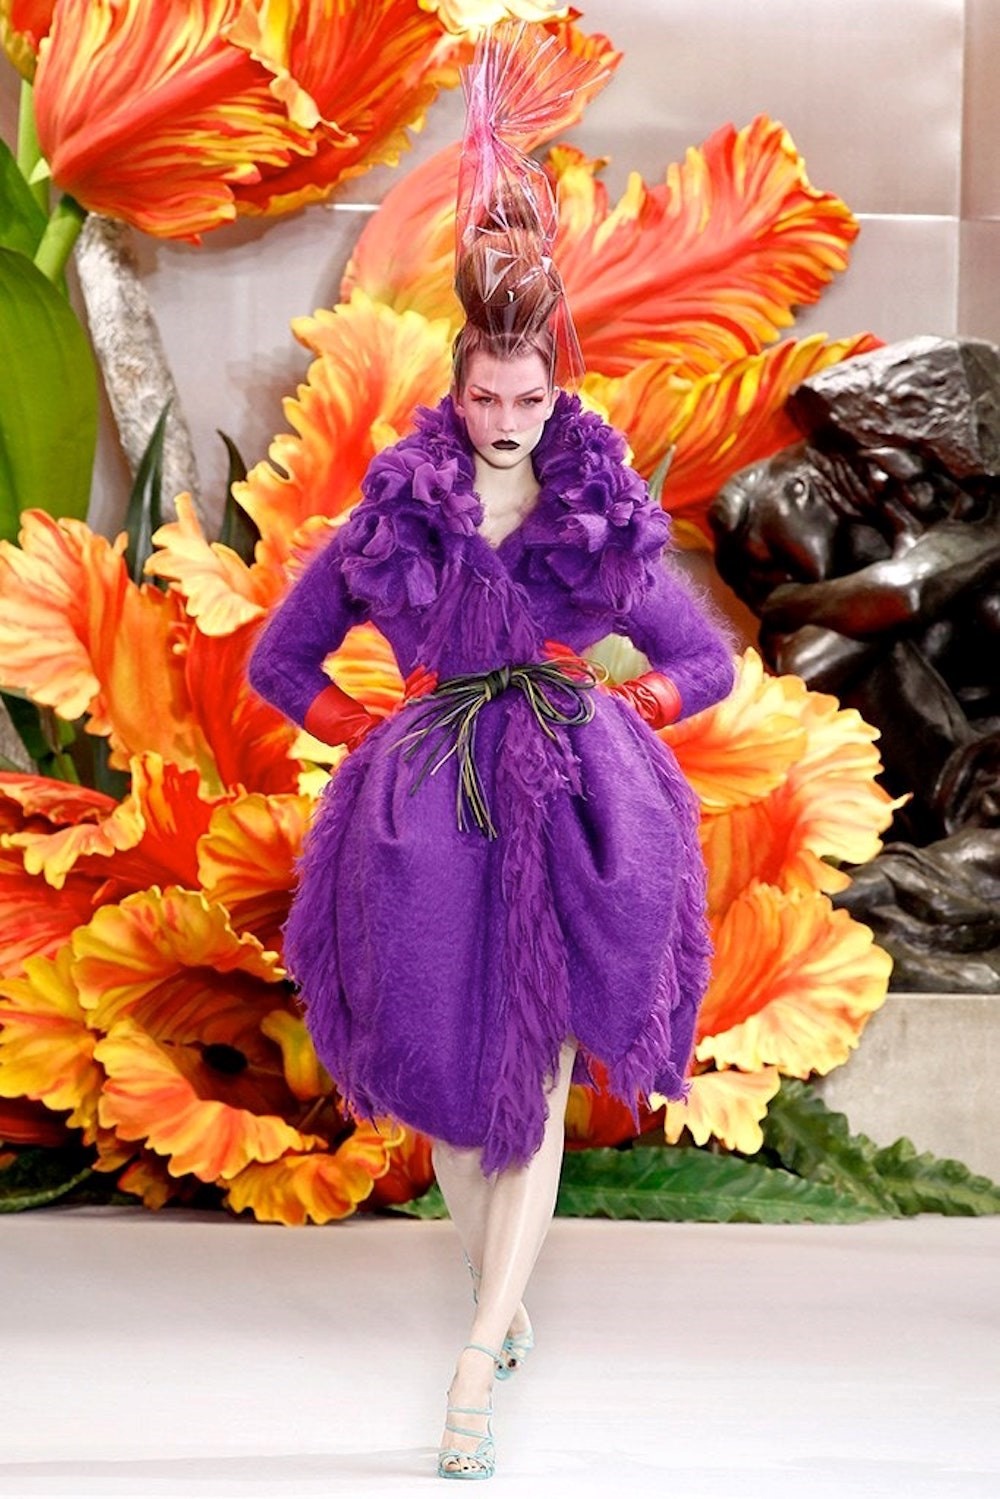 Galliano-less Dior couture show fails to inspire - Deseret News